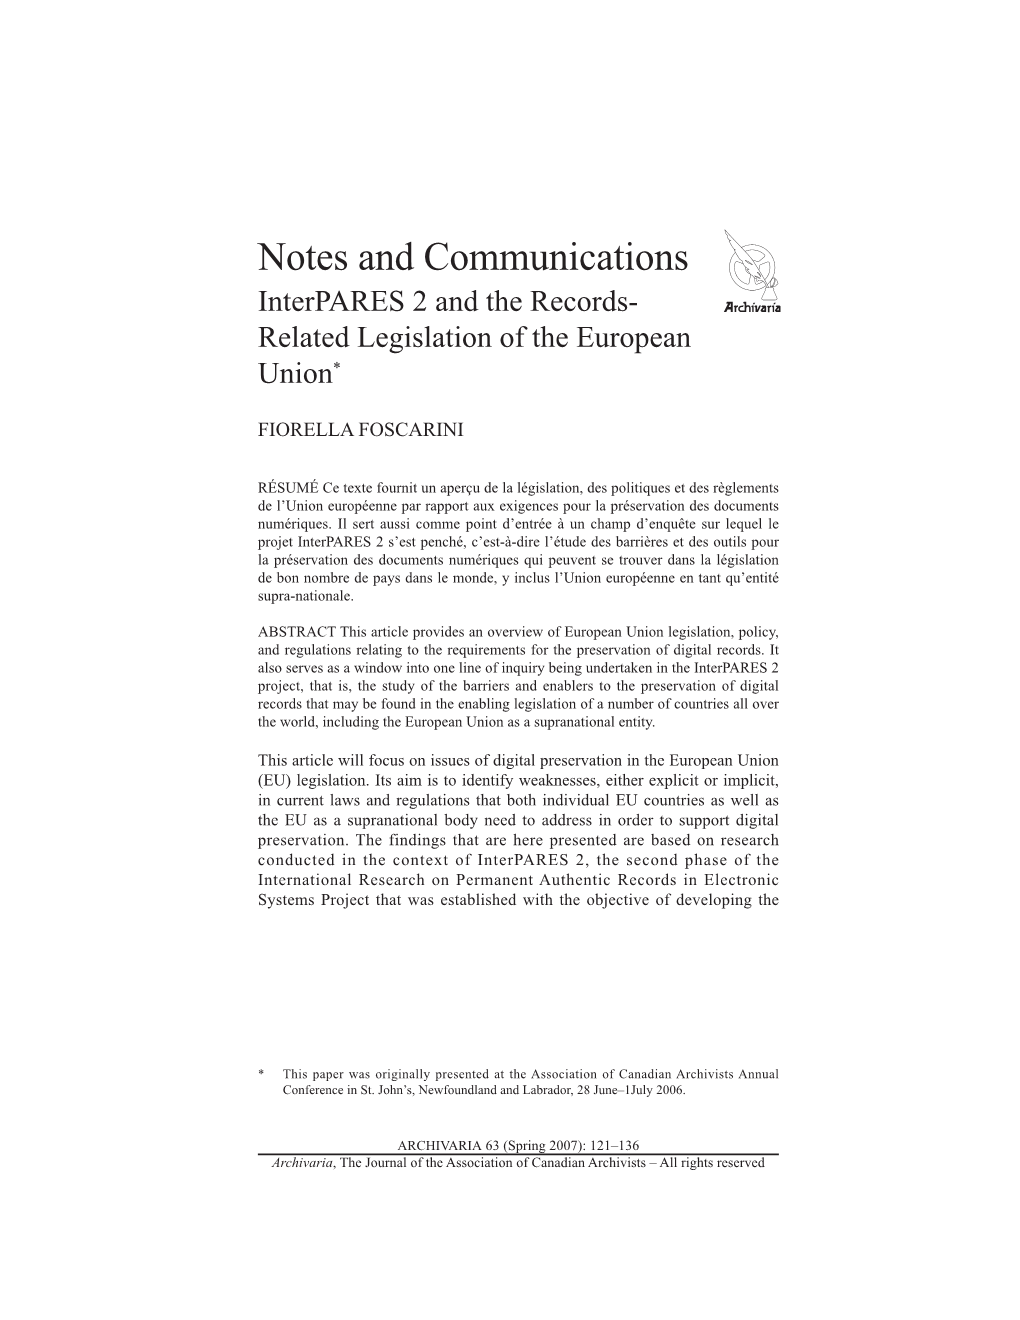 Interpares 2 and the Records-Related Legislation of the EU 123